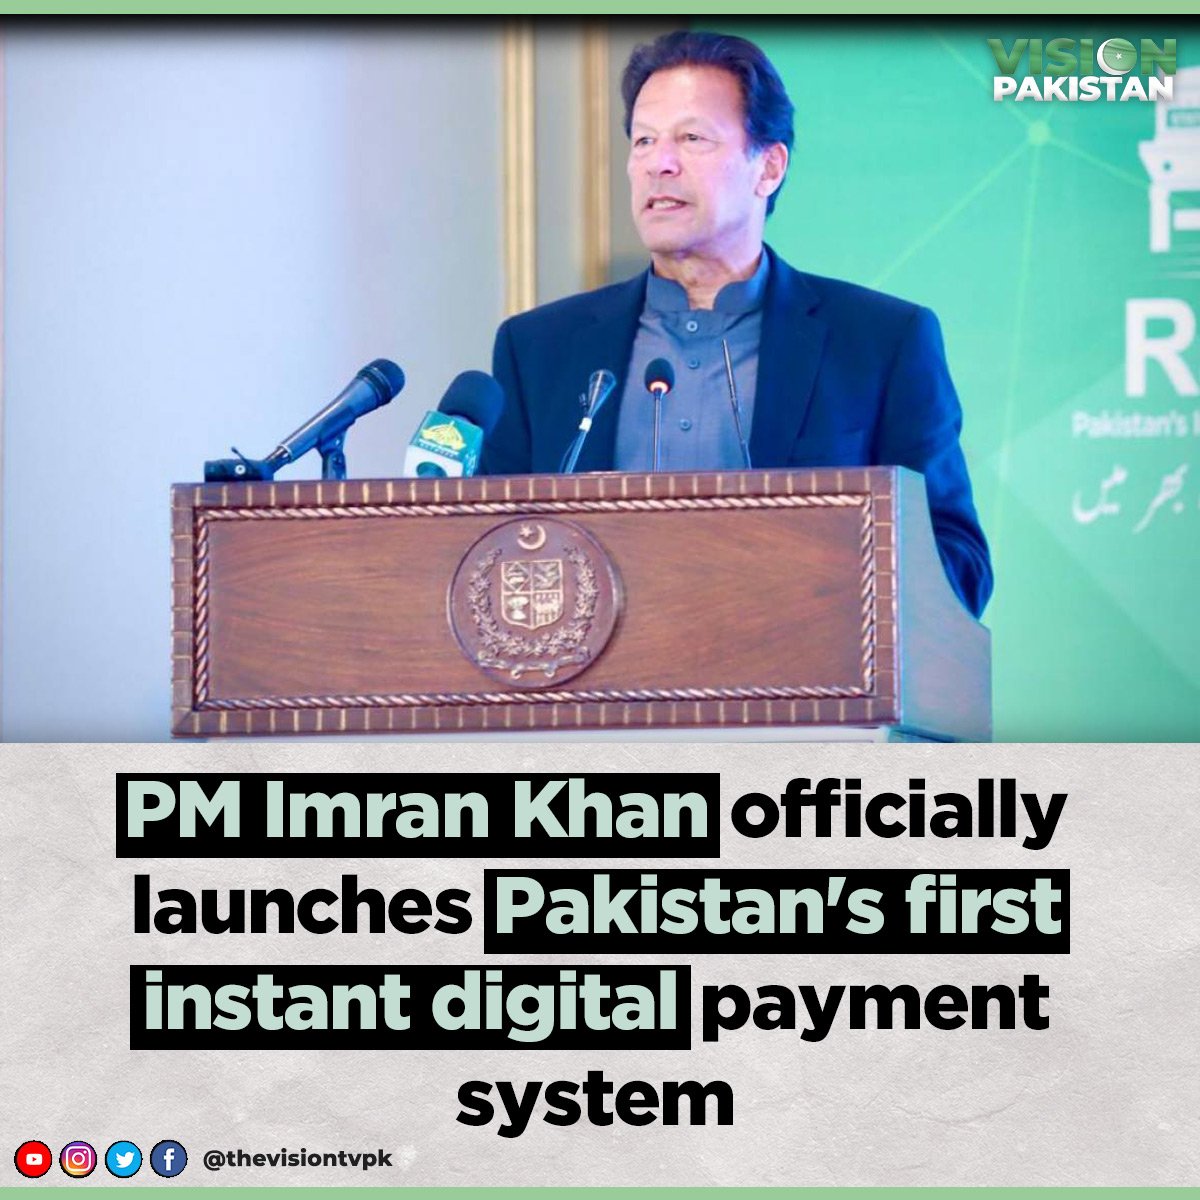 PM Imran Khan officially launches Pakistan's first instant digital payment system
#ImranKhan #Raast #digitalpaymentsystem